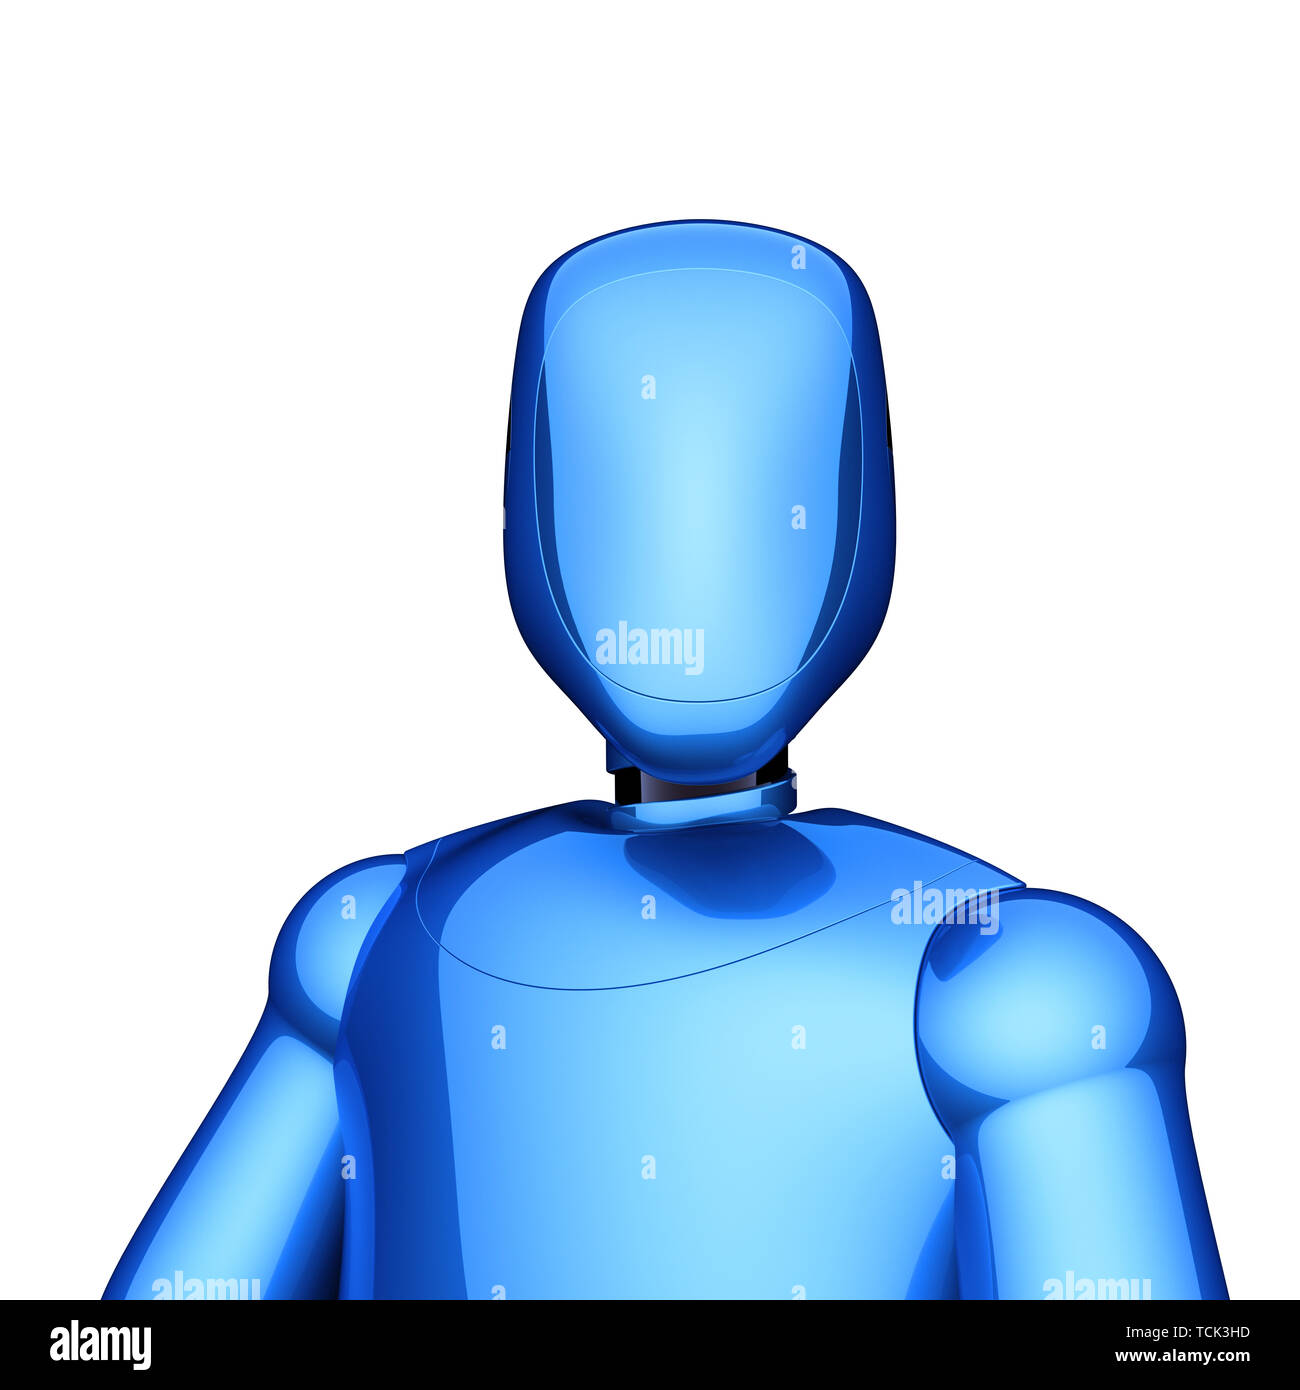 Blue robot futuristic cyborg android doll toy artificial character concept. 3d illustration, isolated Stock Photo